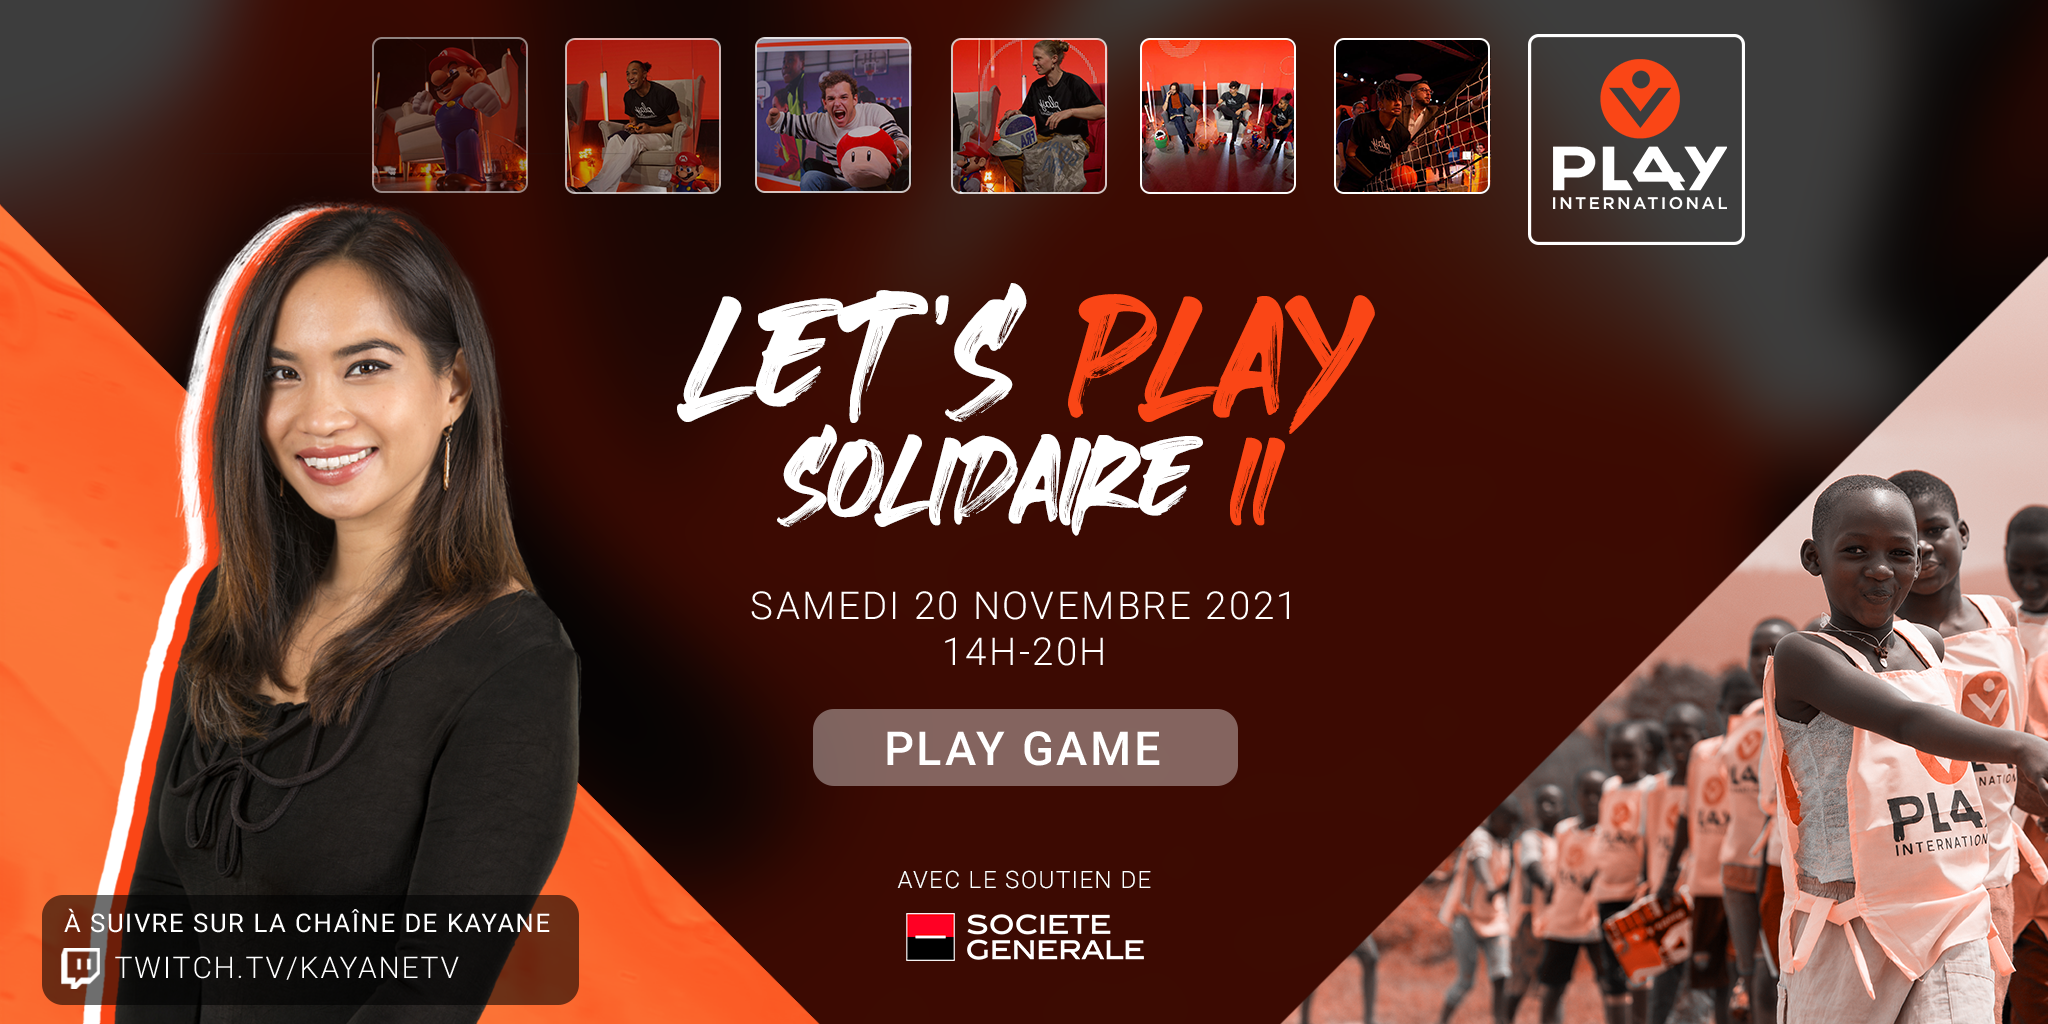 Let's Play solidaire II